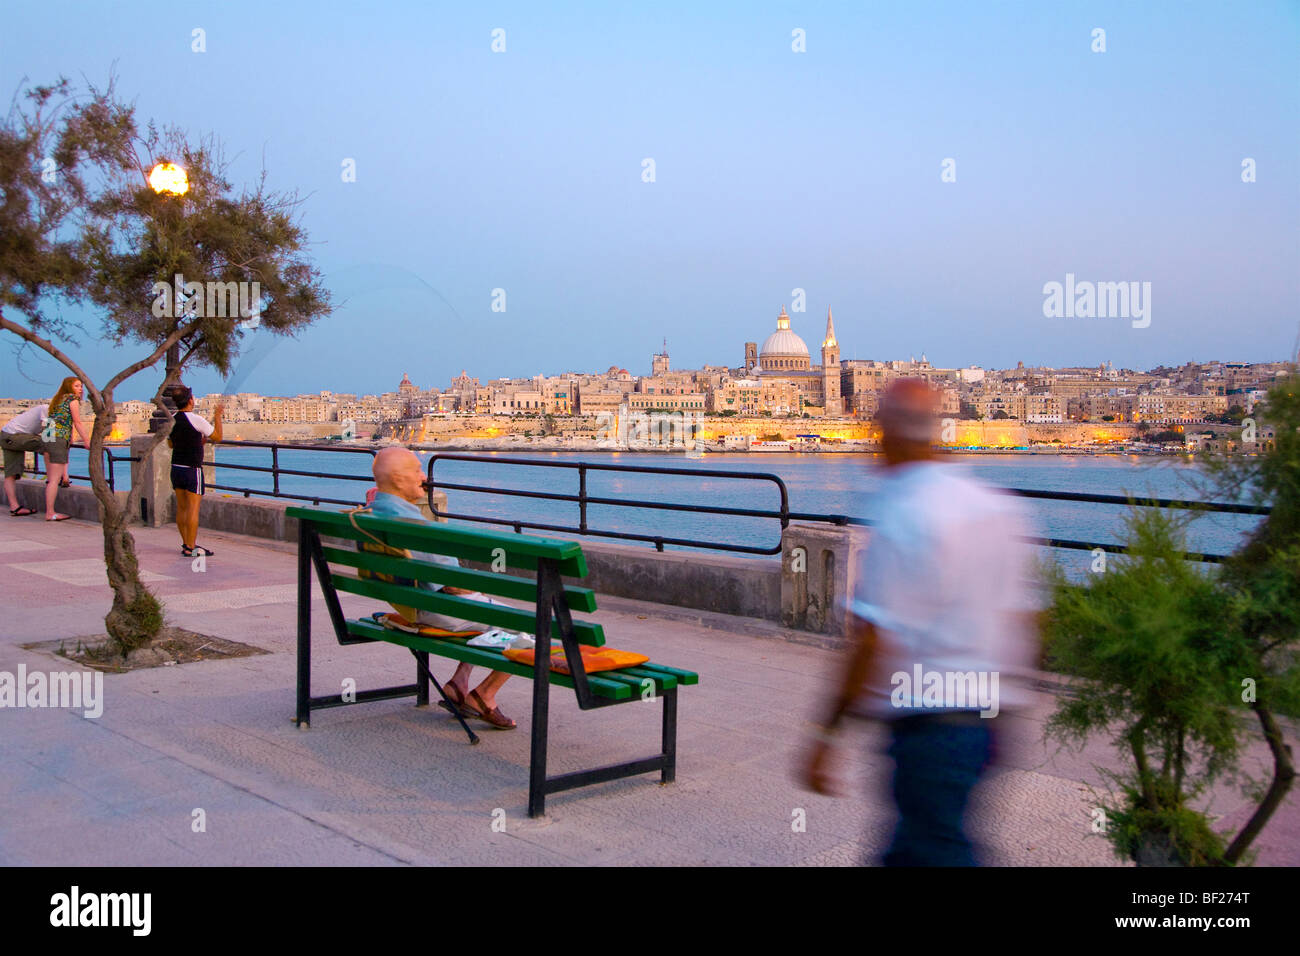 People at the promenade in the evening, view at Valletta, Sliema, Malta, Europe Stock Photo